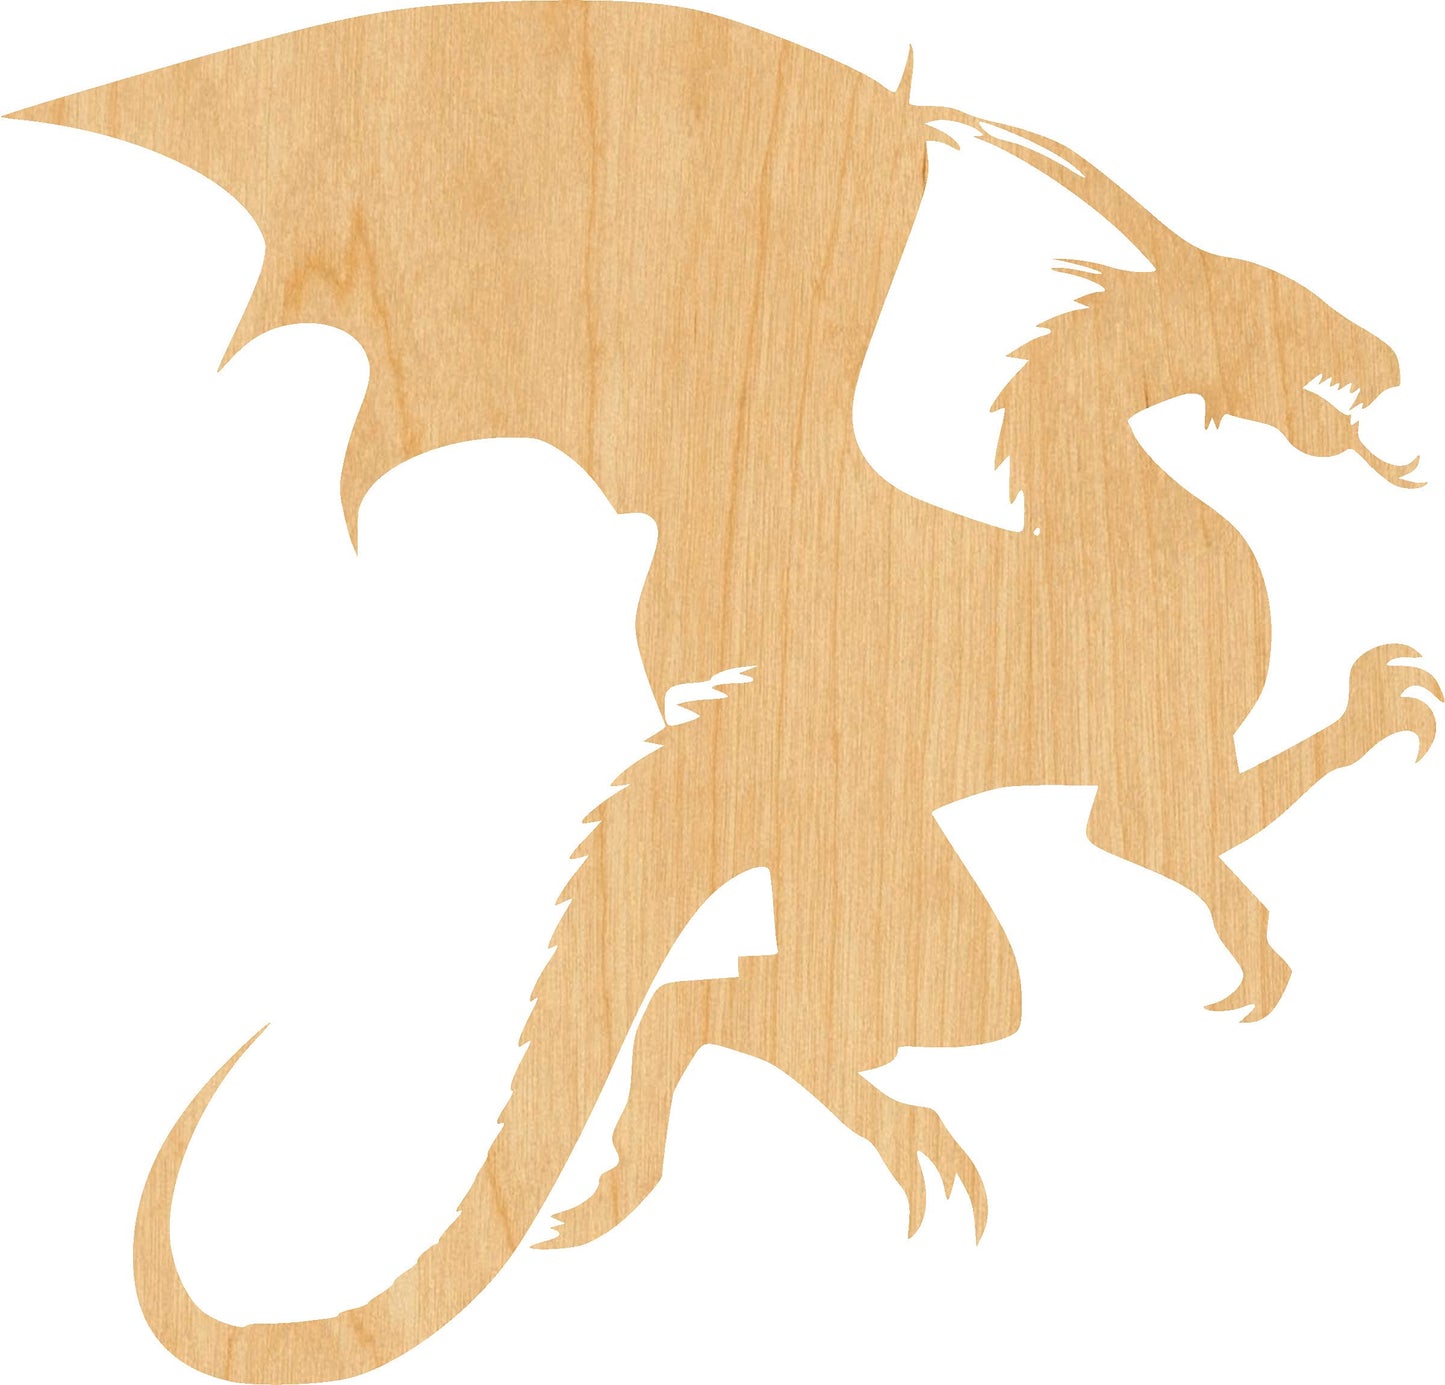 Dragon 4 Laser Cut Out Wood Shape Craft Supply - 2"